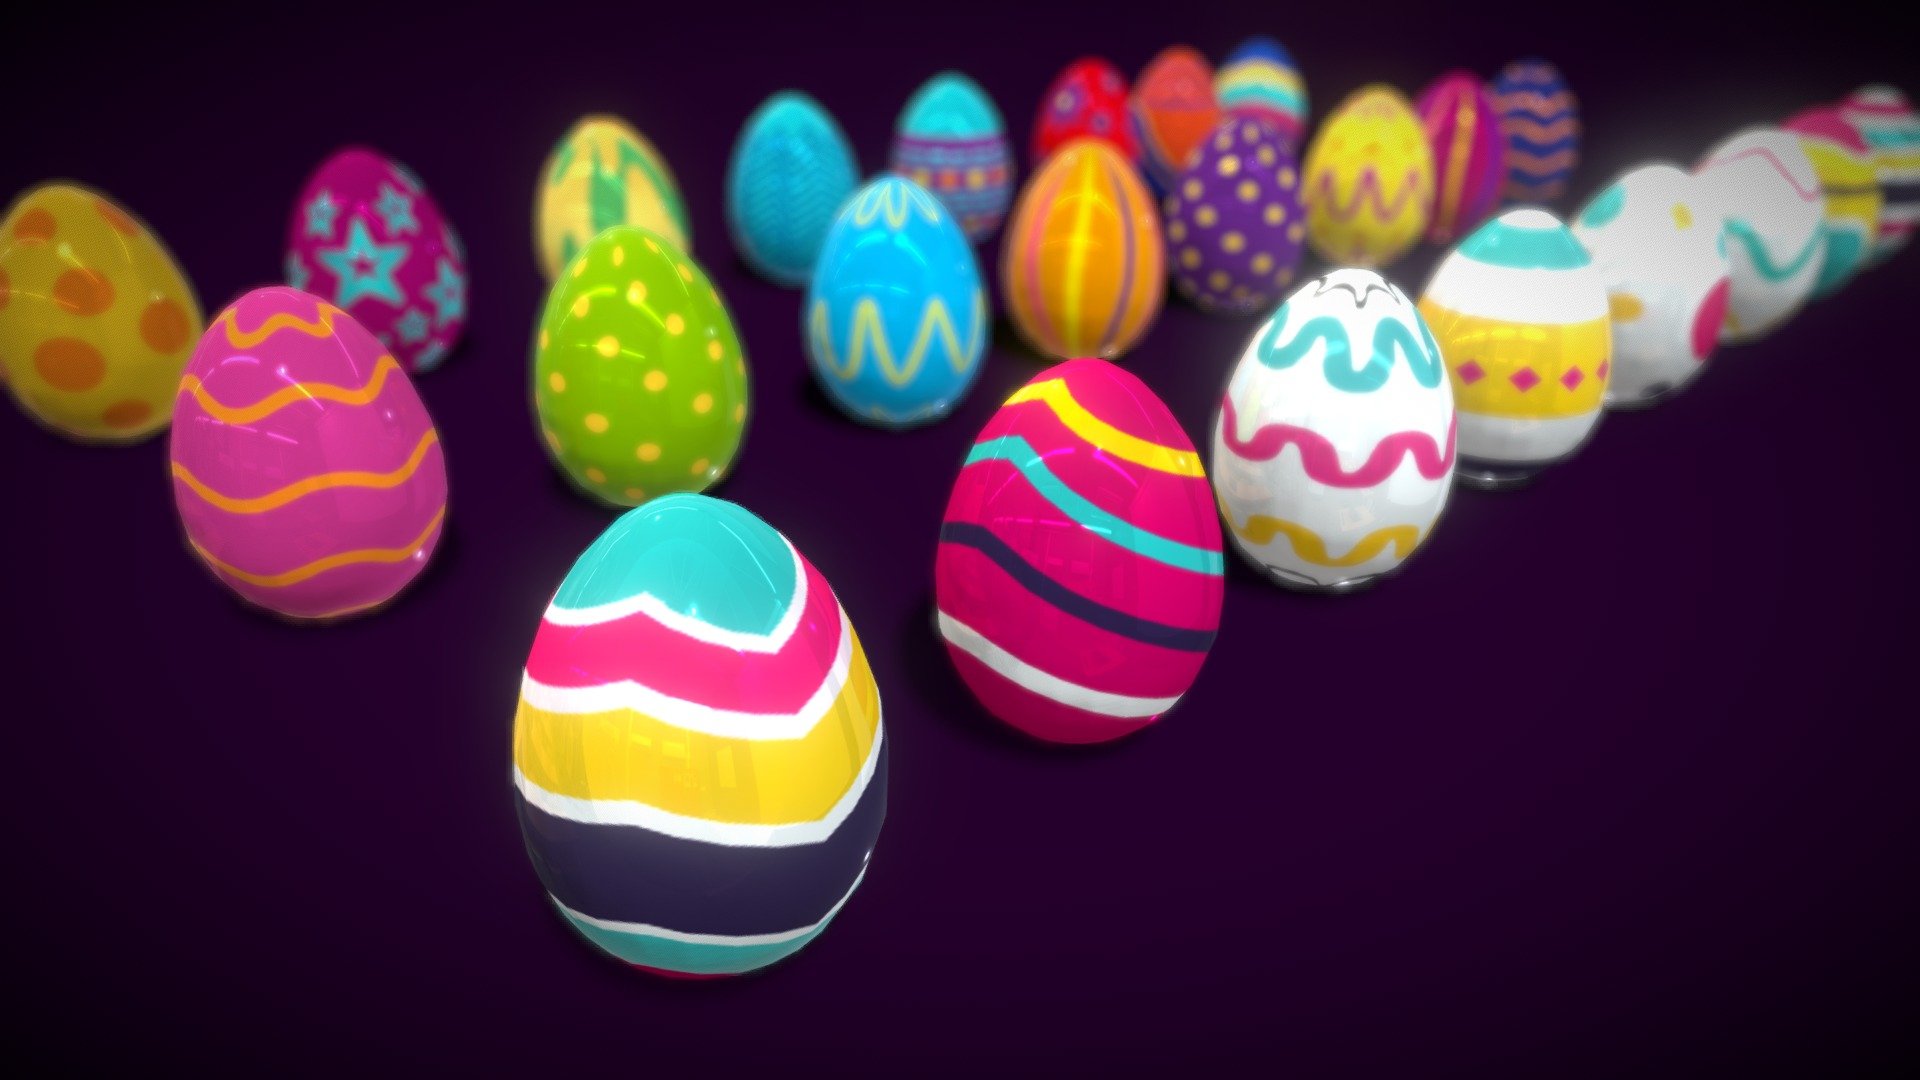 Get ready for Easter!

Colections Easter Eggs 4 model low-poly 3d model ready for Virtual Reality (VR), Augmented Reality (AR), games and other real-time apps. its ready for rendering and advertising too
Features:
- 24 egg prefabs
- 3 Colections styles texture
Polycount list :
- Model 3D lowpoly Eggs ( 8112 polys/14976 Tris/7536 Verts)
- 3 Texture colections size 1024/1024
Please contact me if you have questions or need assistance with the models 3d model